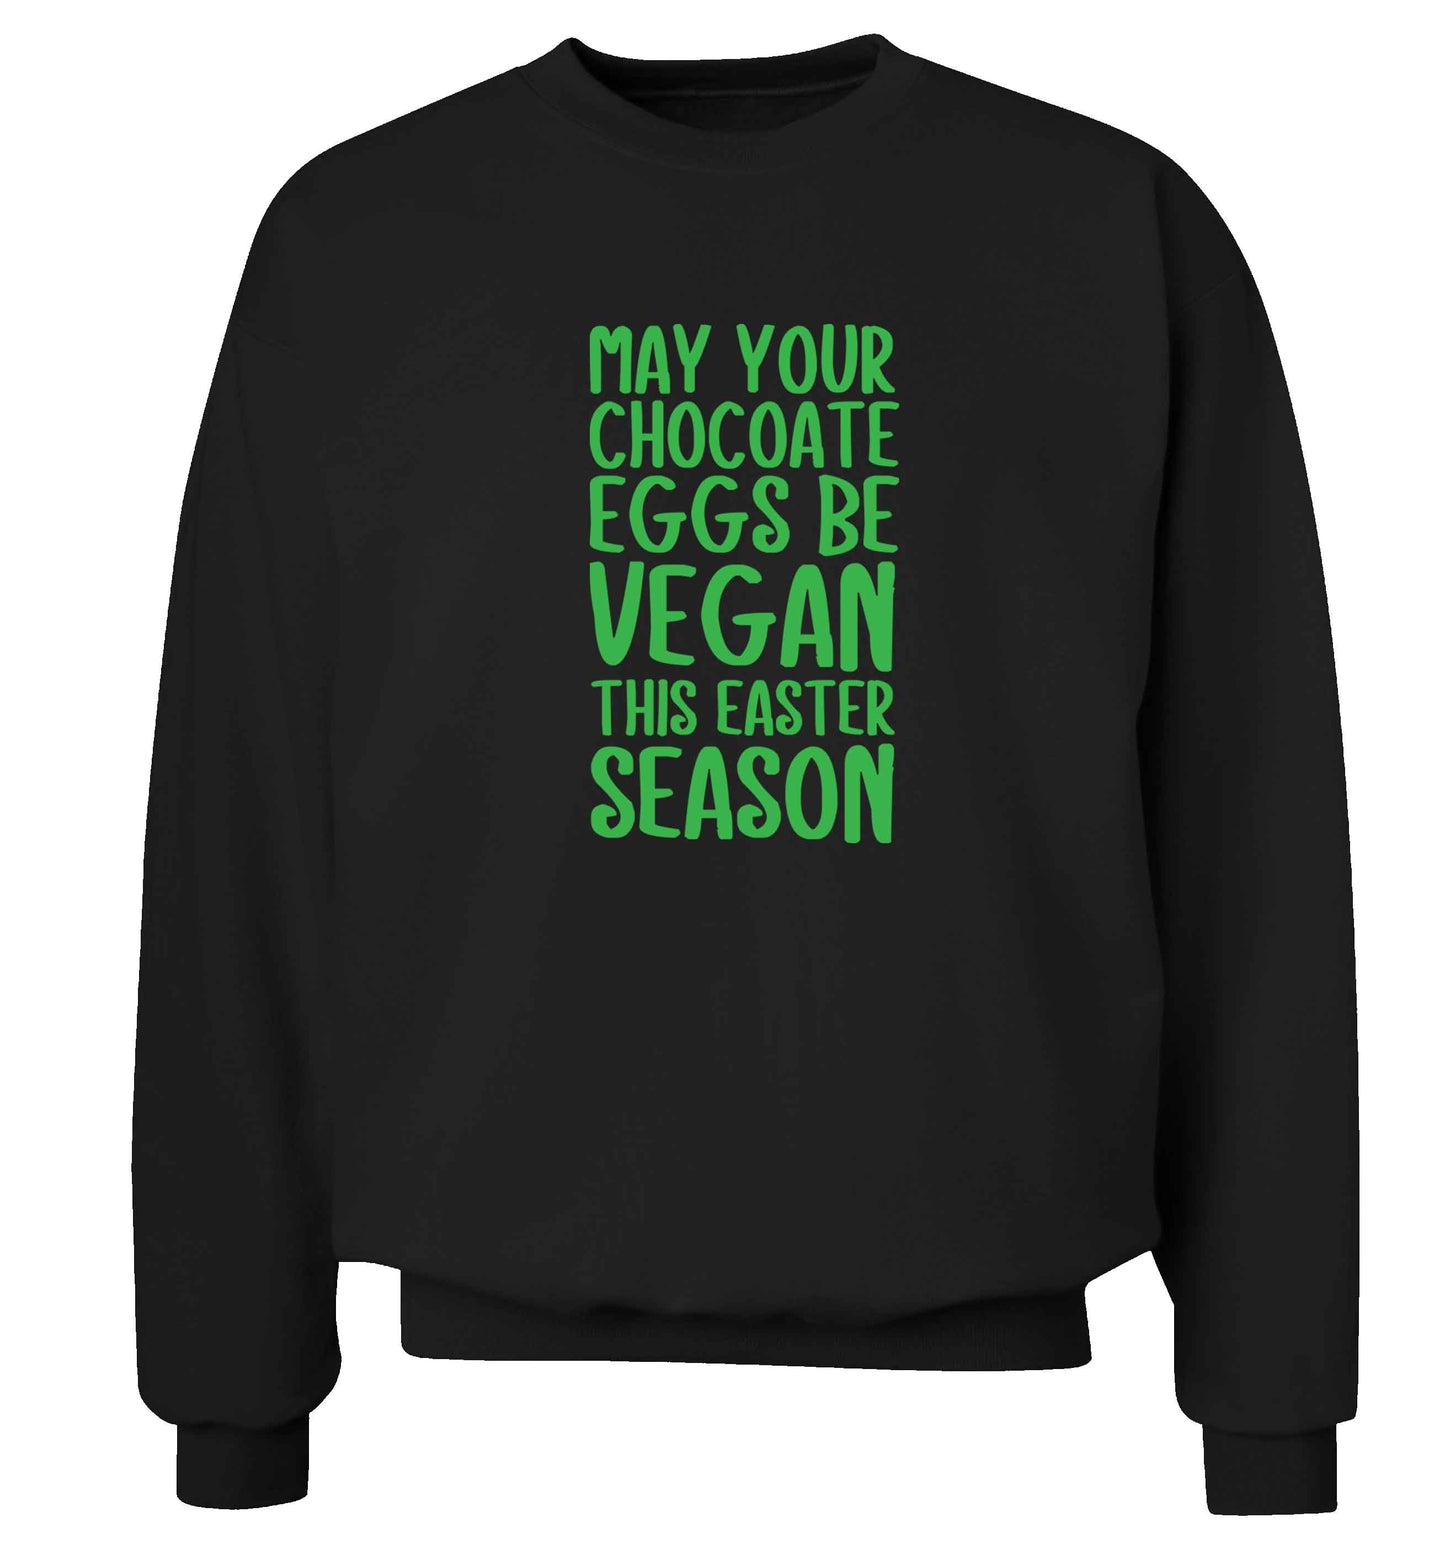 Easter bunny approved! Vegans will love this easter themed adult's unisex black sweater 2XL